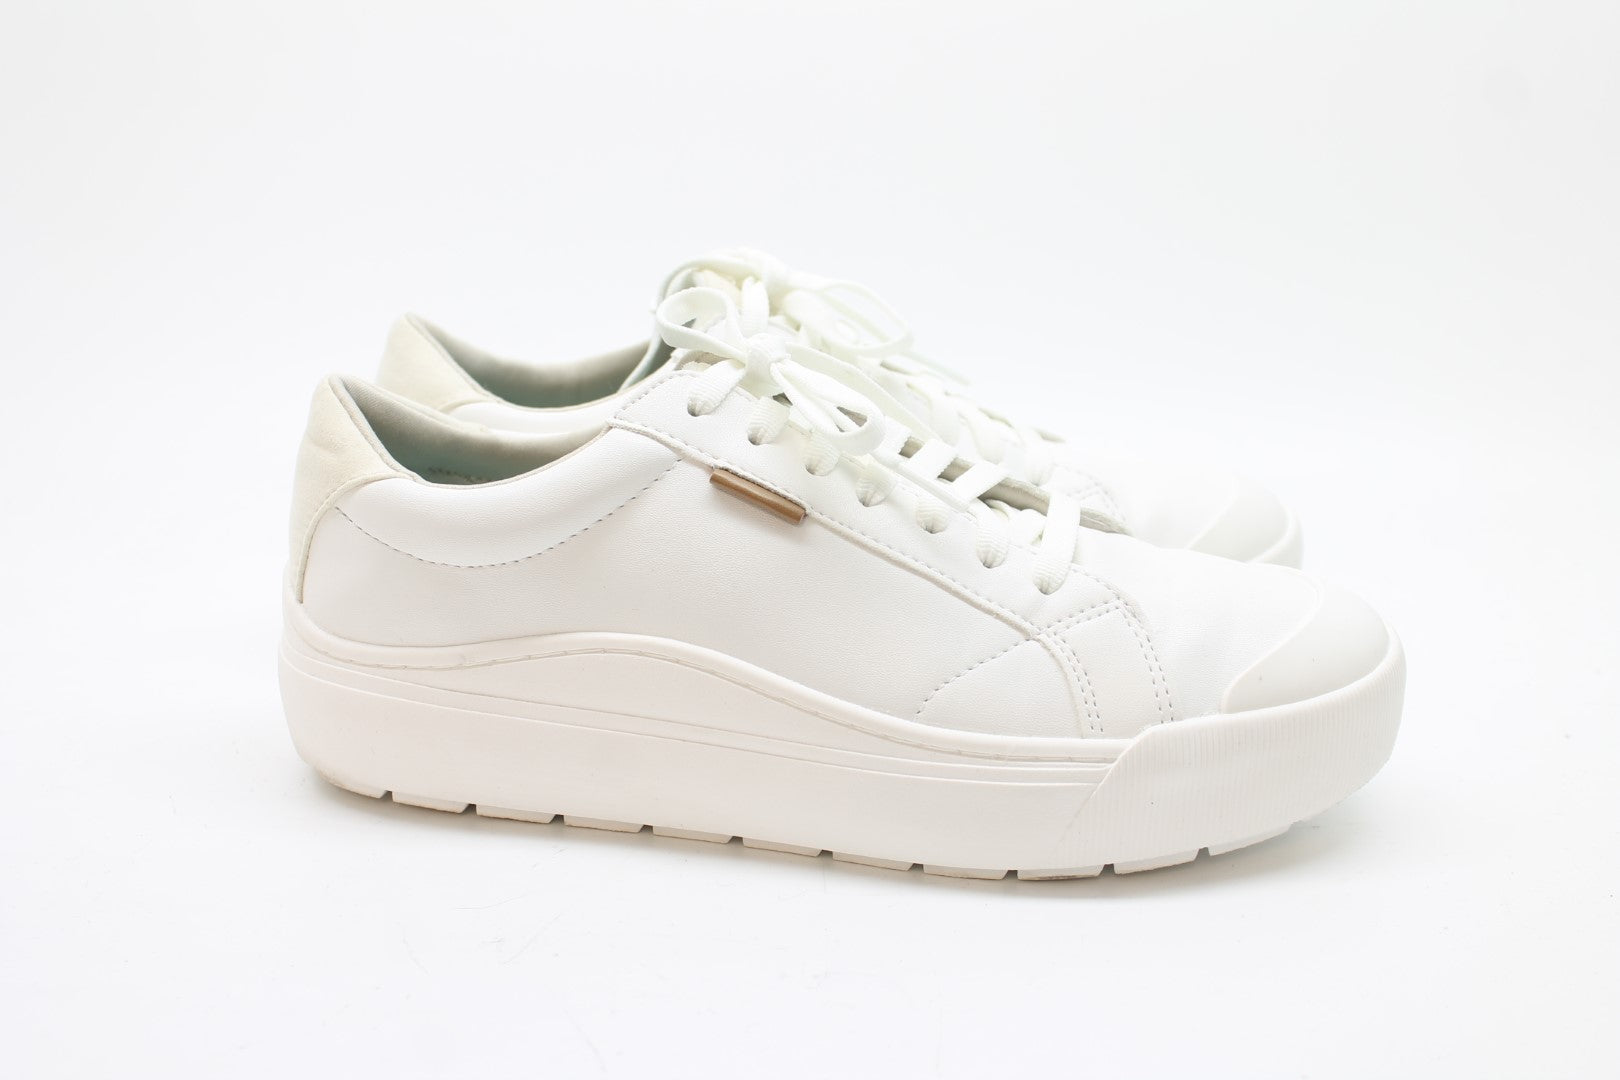 Dr. Scholl's Women's Time Off Lace Up Sneaker White 9.5M